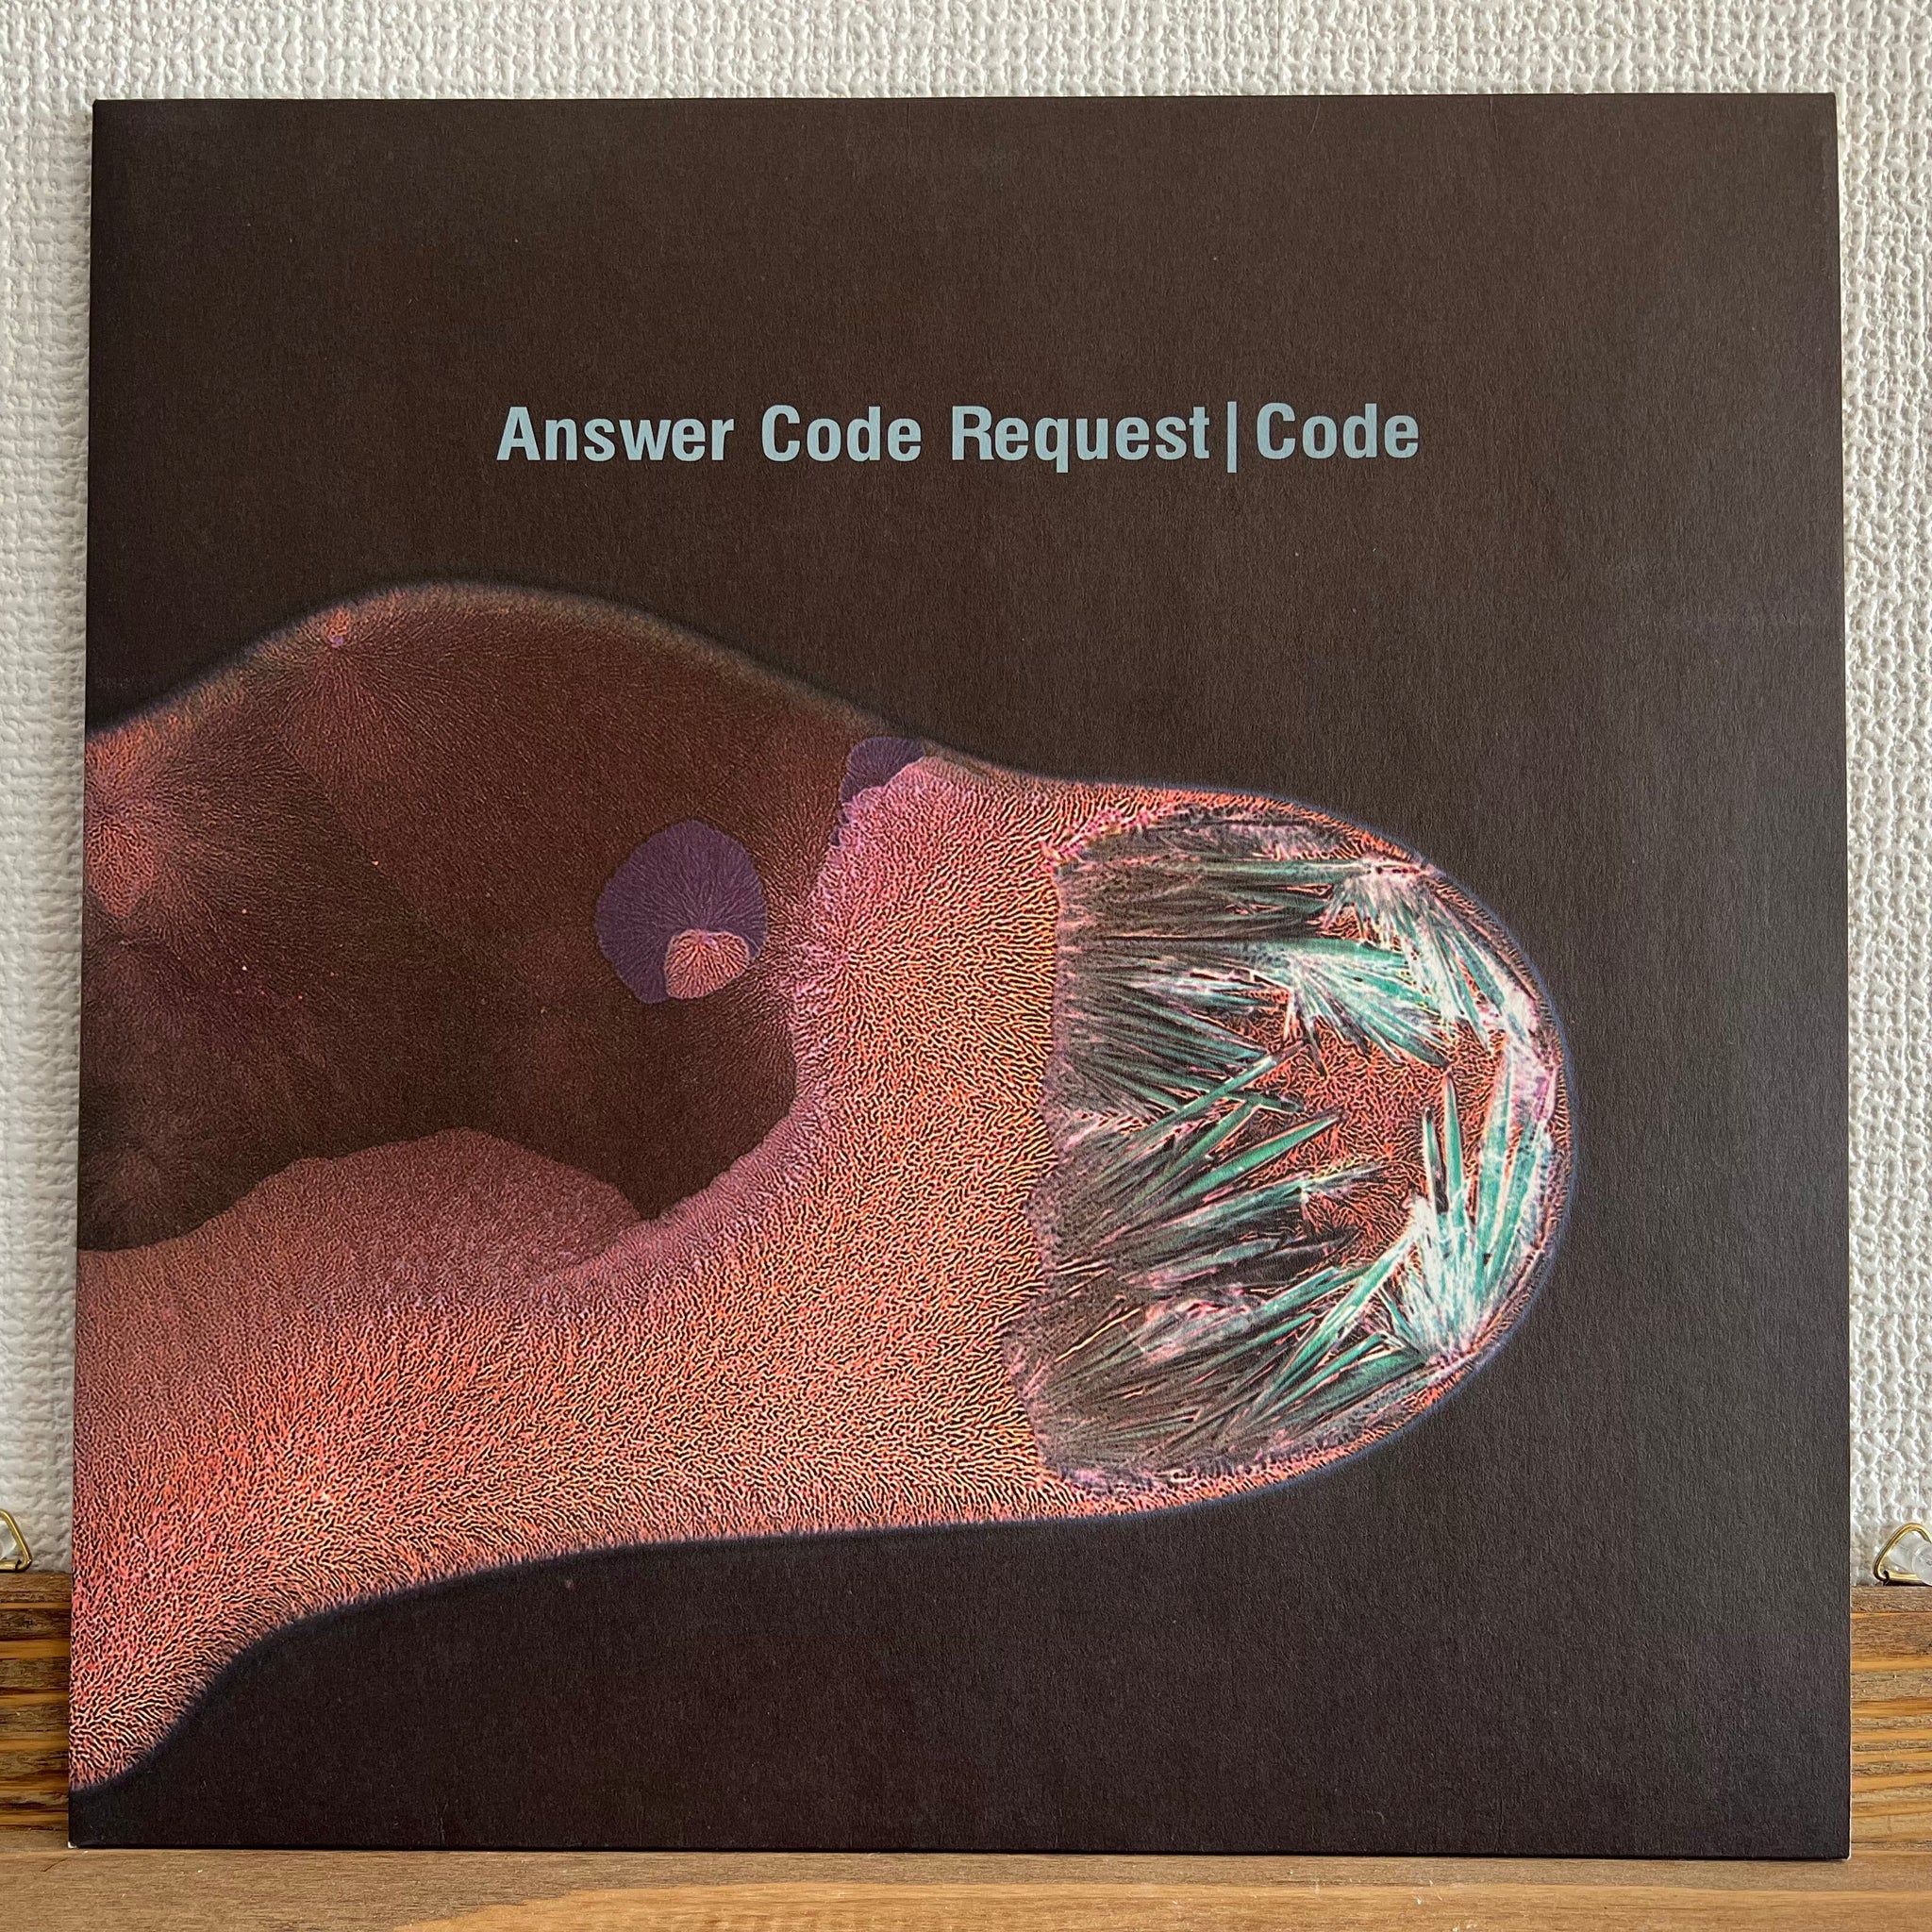 Answer Code Request -  Code